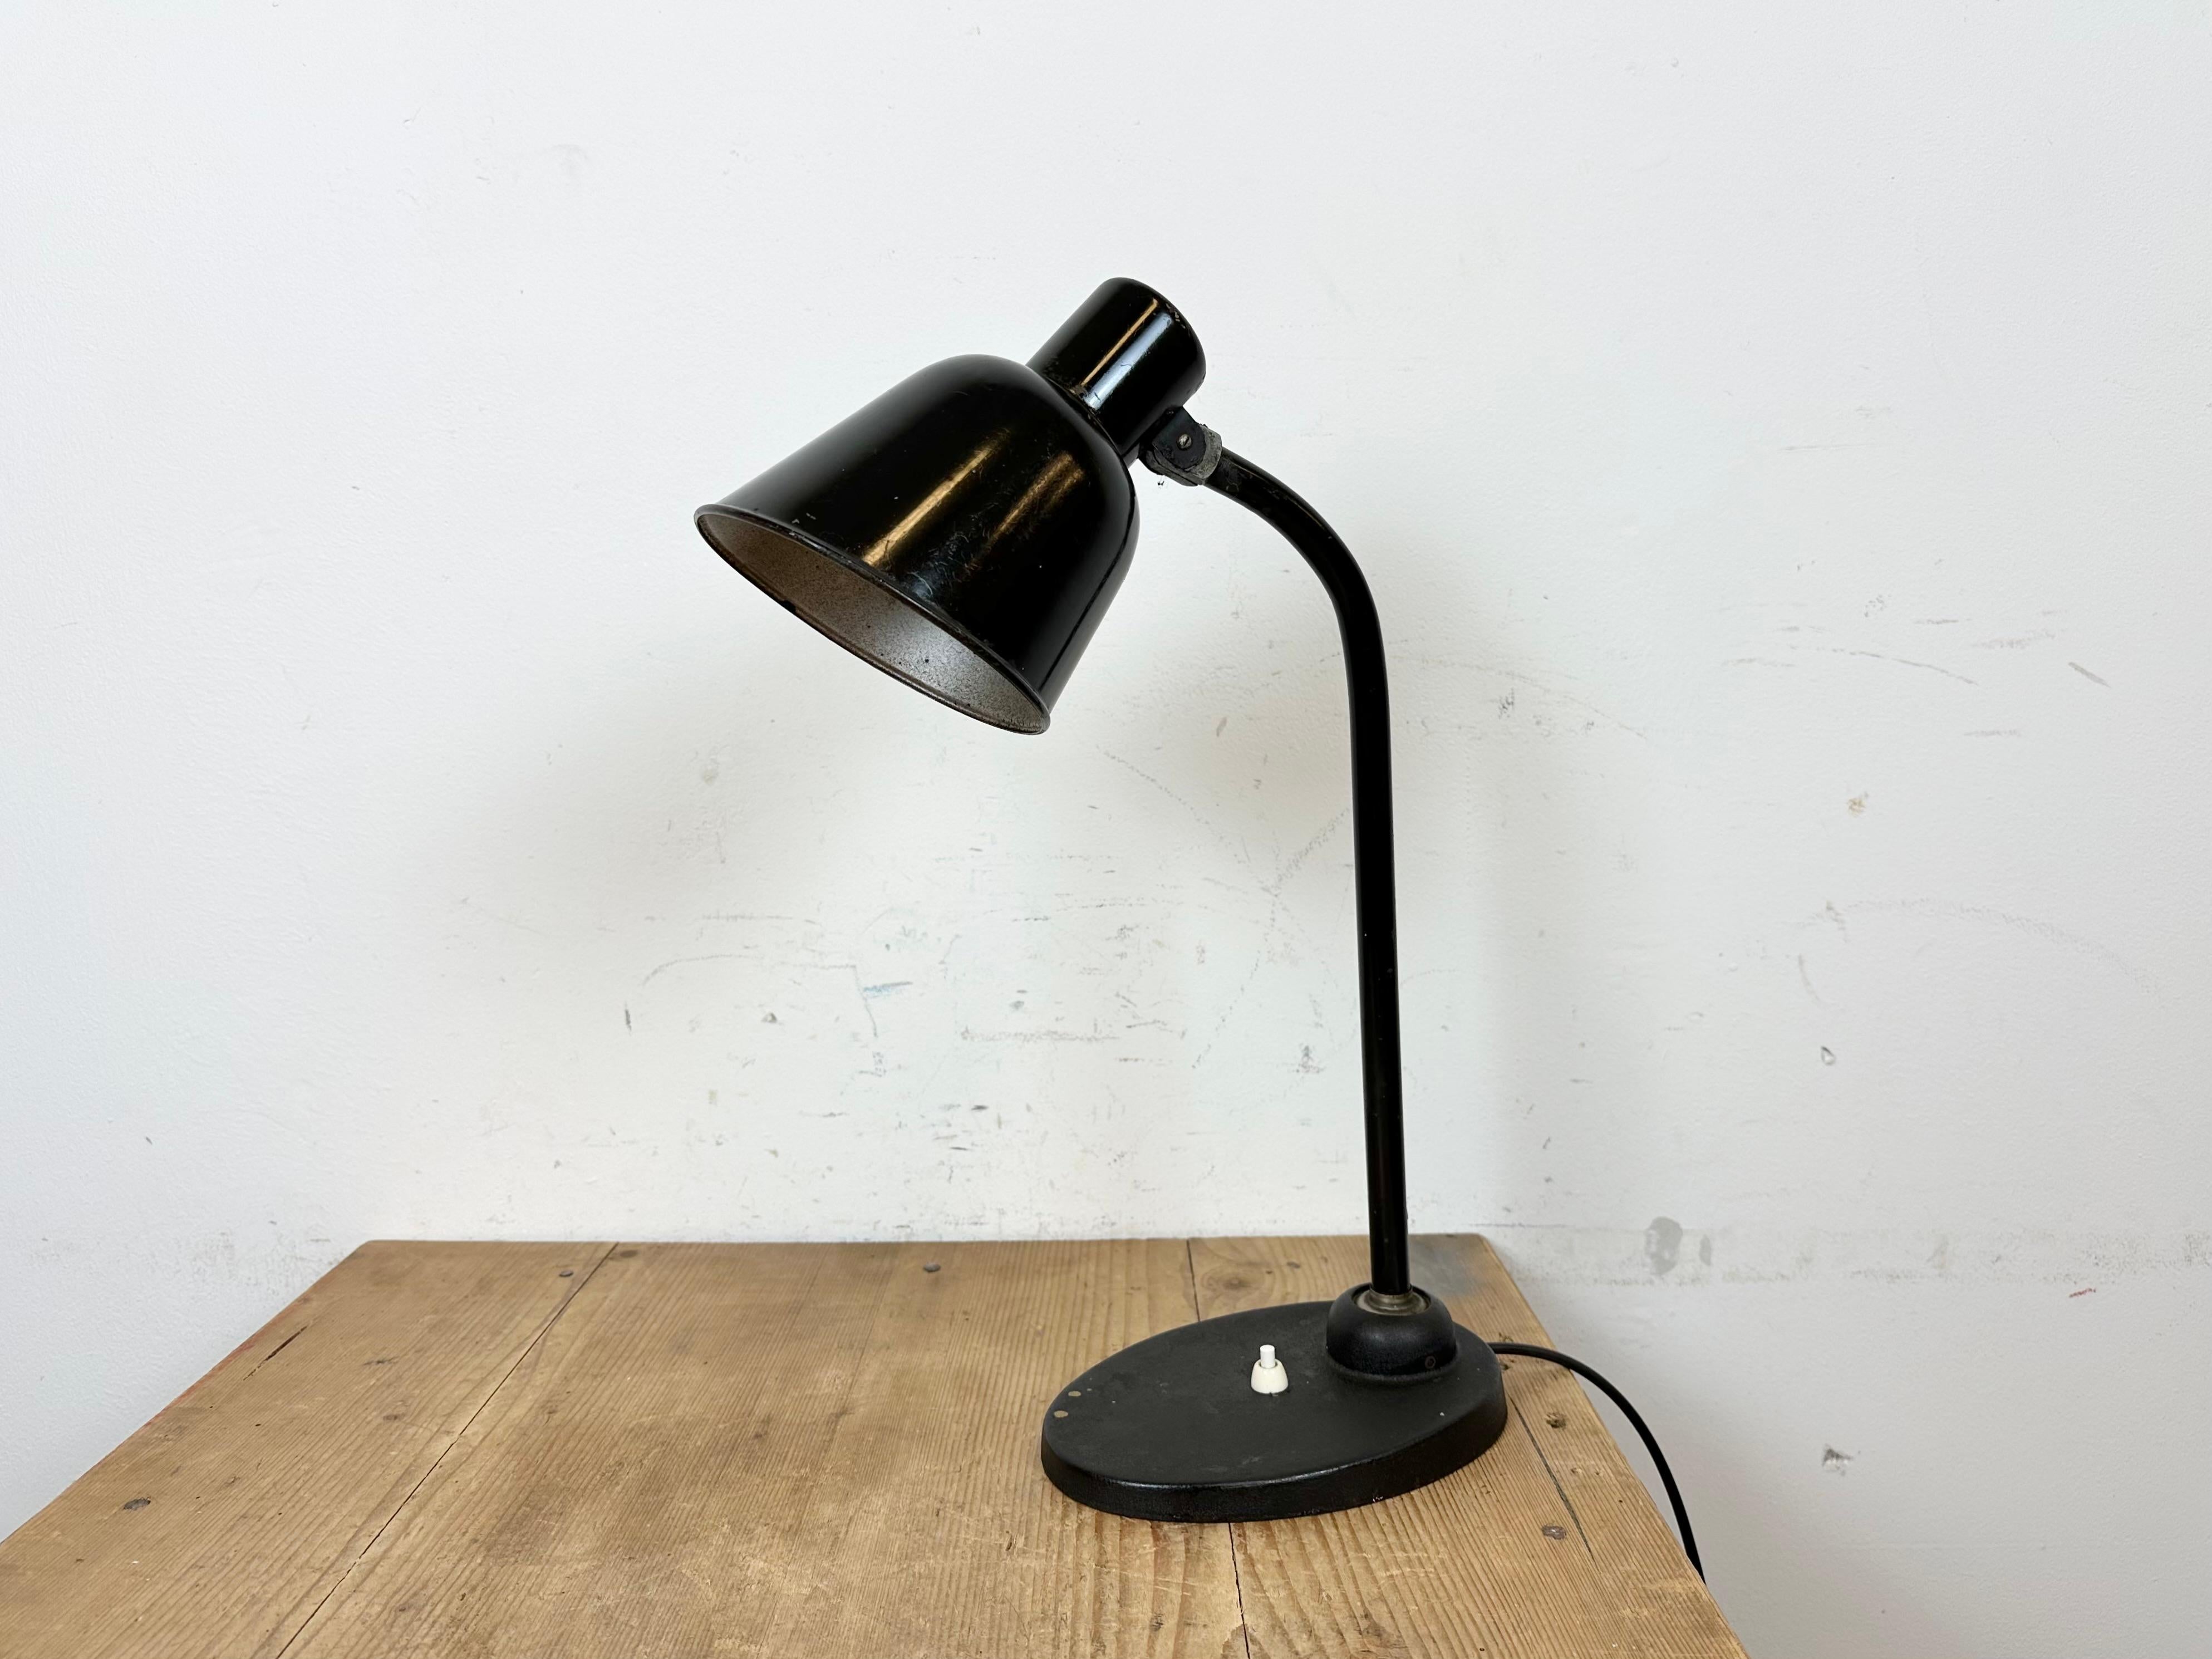 Vintage 1930s BUR Model 2700 table lamp designed by famous BAUHAUS designer Christian Dell For BUR Bunte & Remmler Lighting Company Germany.
It features a black iron body with adjustable arm and shade. The socket requires standard E 27/ E 26 light